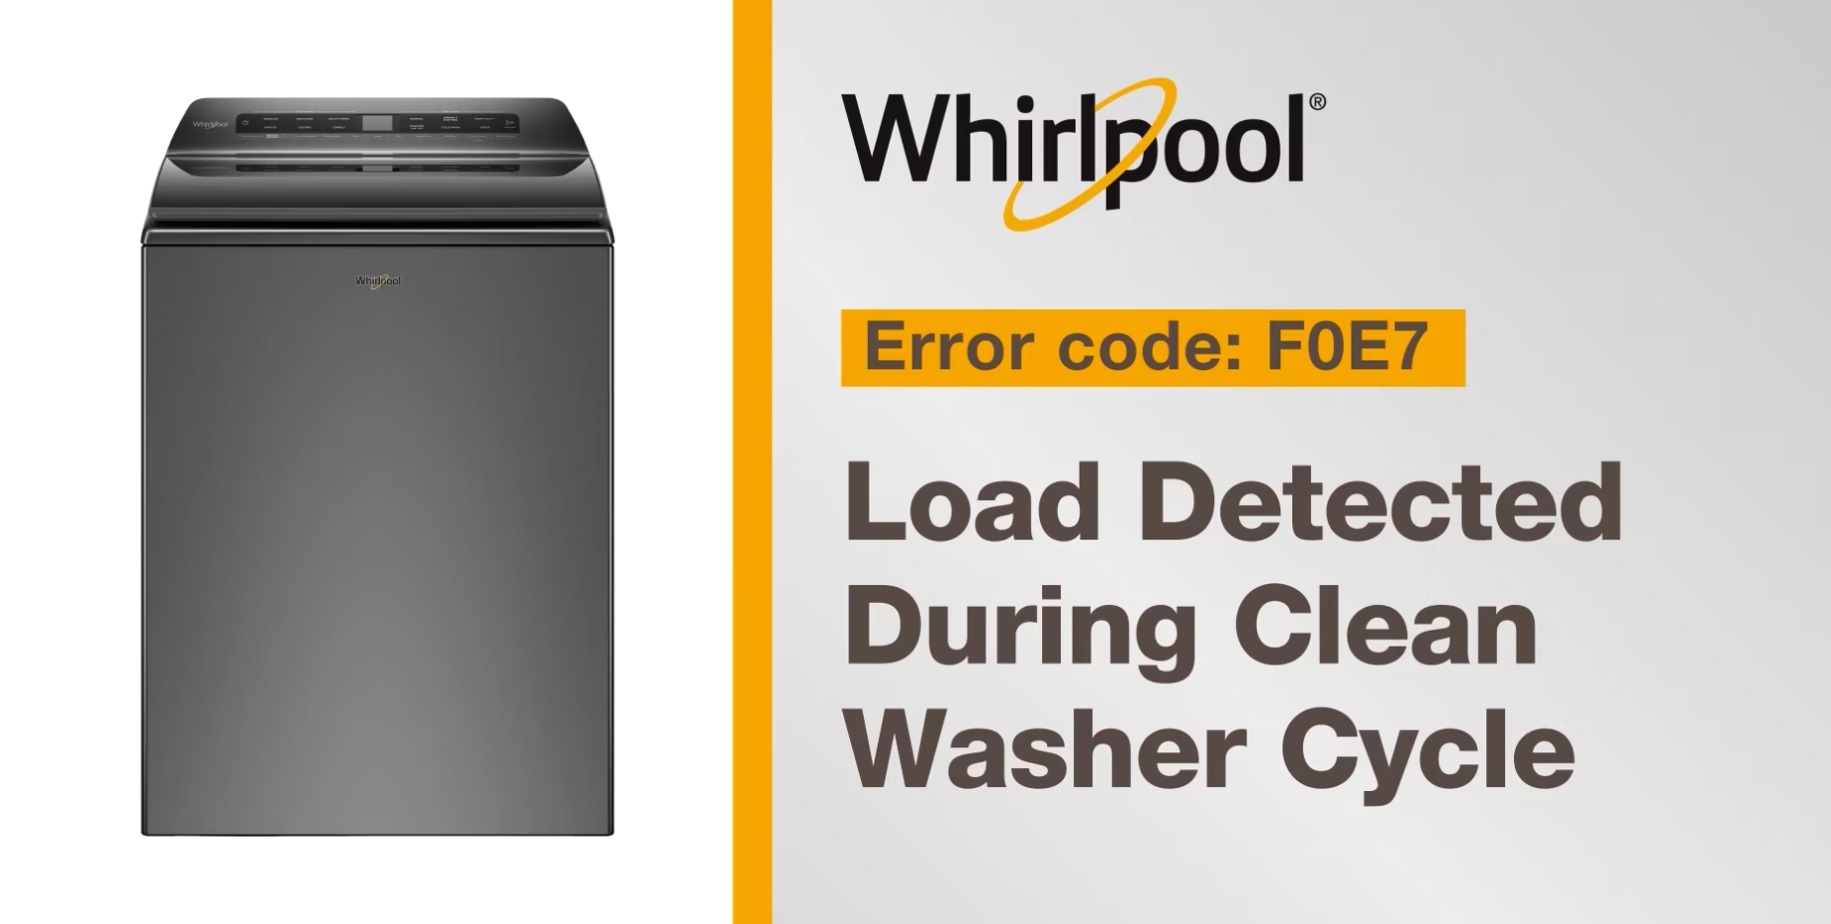 Follow these simple steps to resolve Error Code F0E7, on your Whirlpool Brand® washer. This video will assist you if you are experiencing load detected during clean washer cycle. If you need further assistance call for service at 1-866-333-4591.